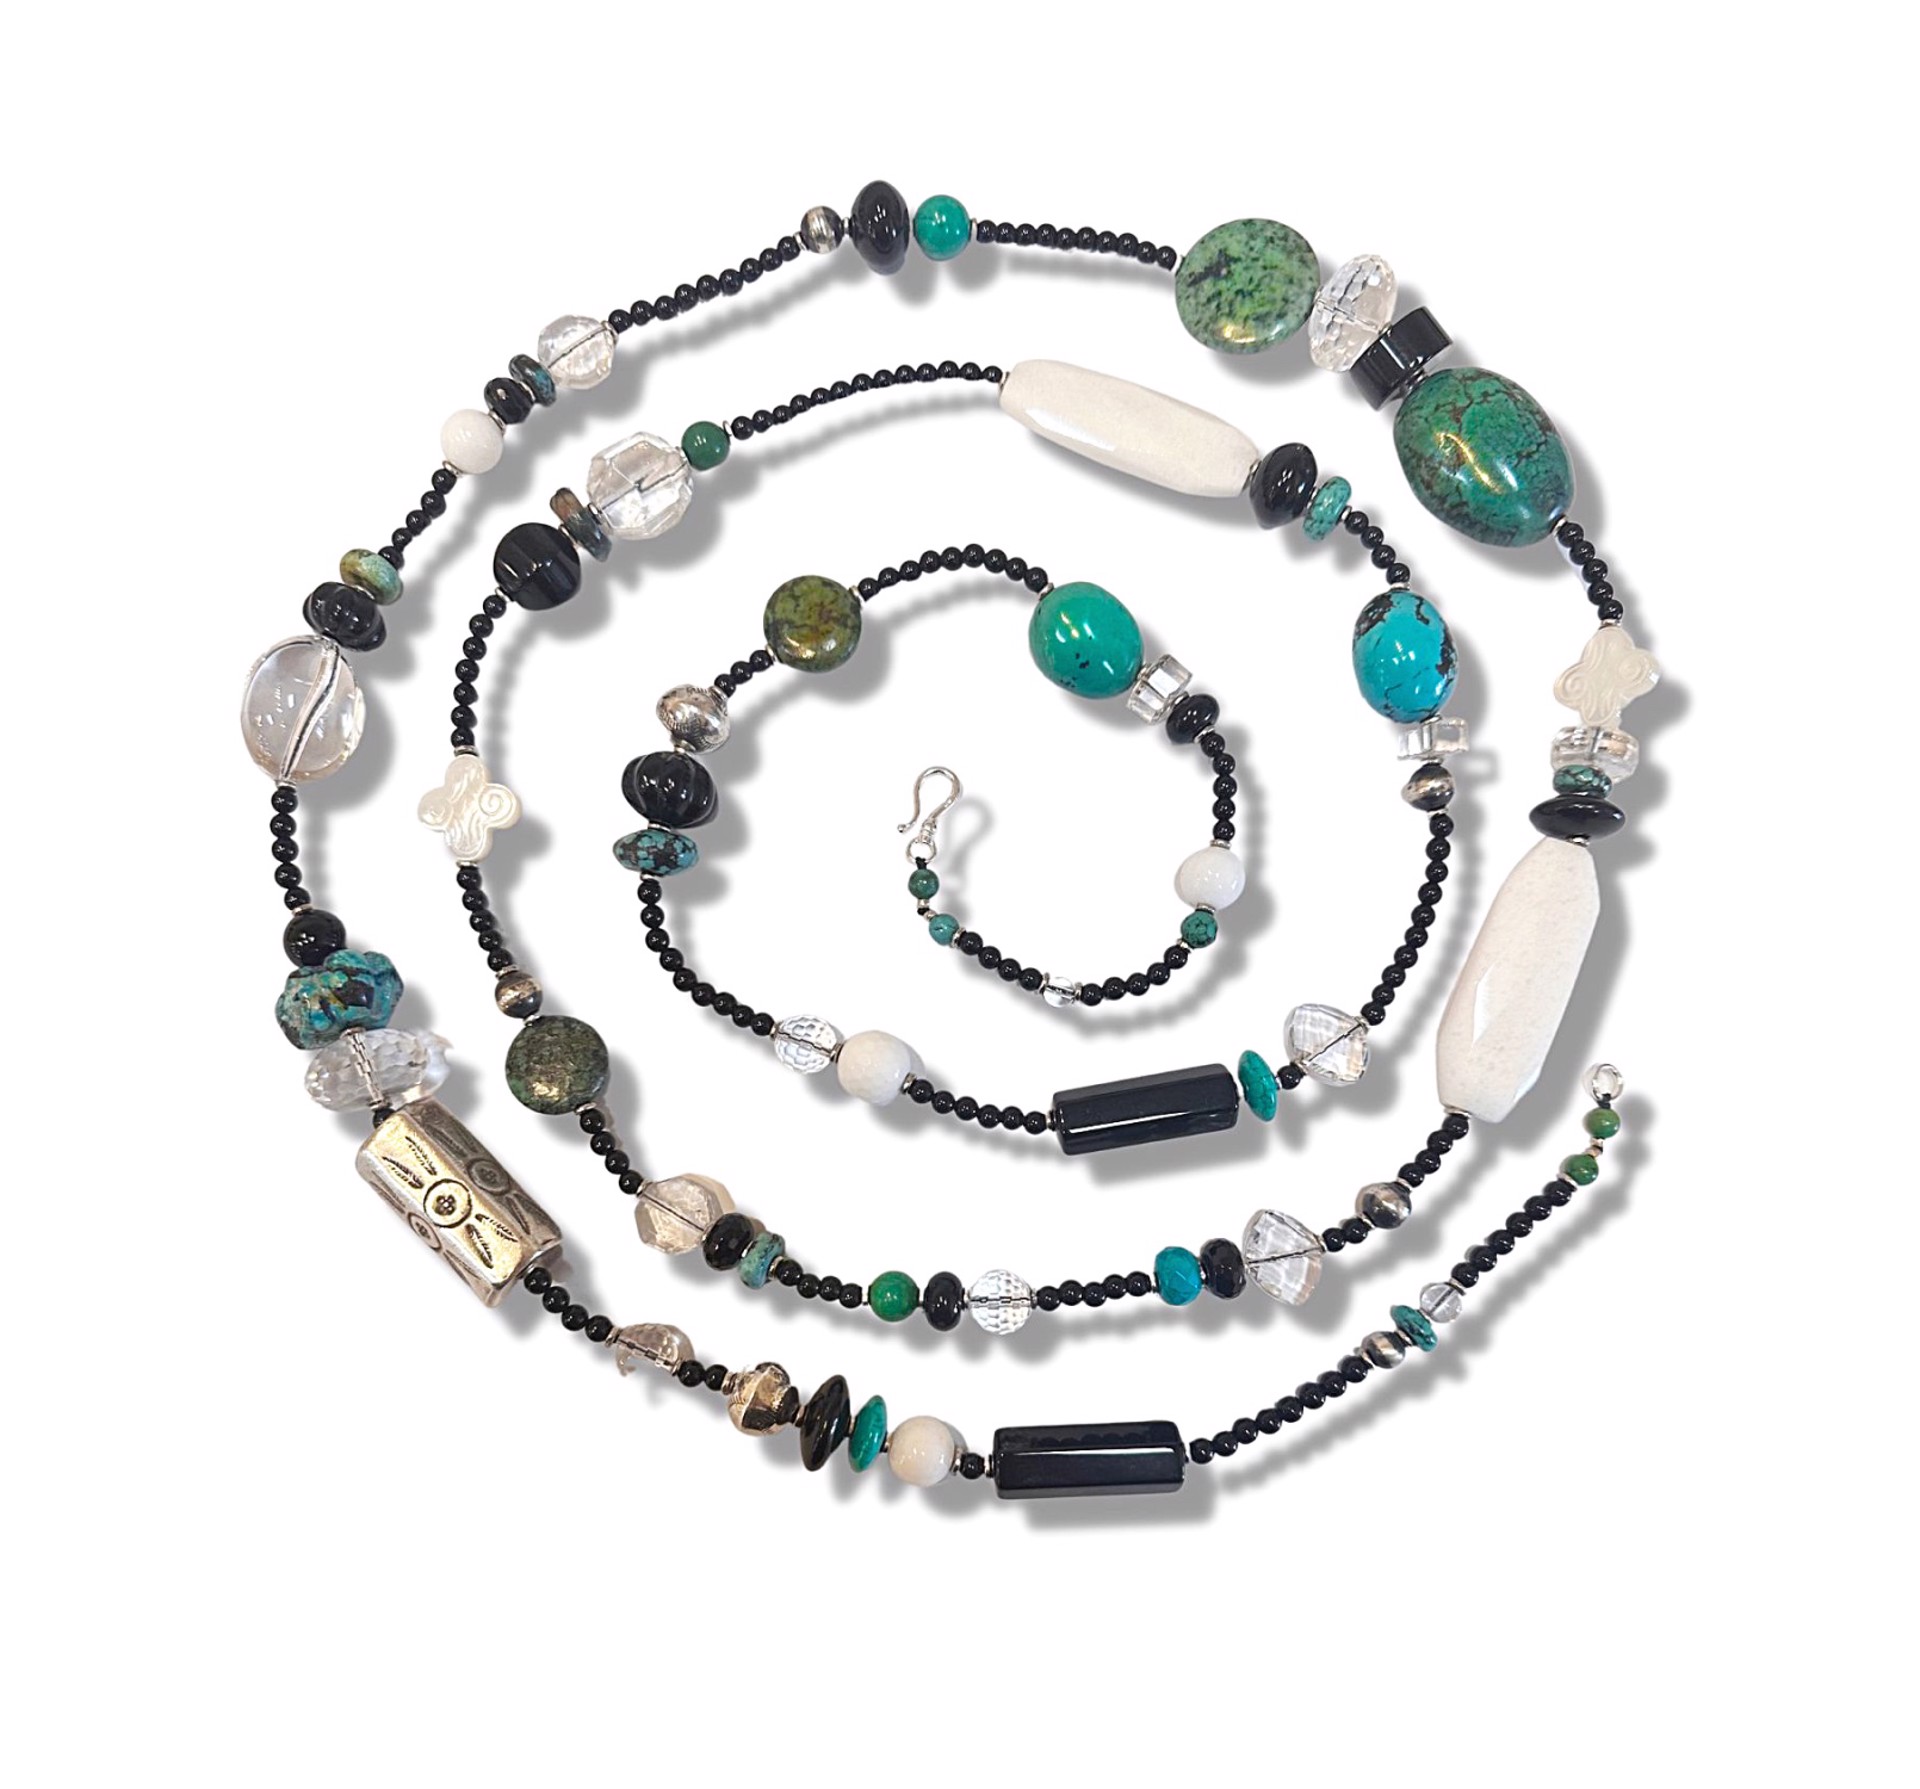 KY 1485 - 60" Onyx, Rock Crystal, and Turquoise Rope Necklace by Kim Yubeta